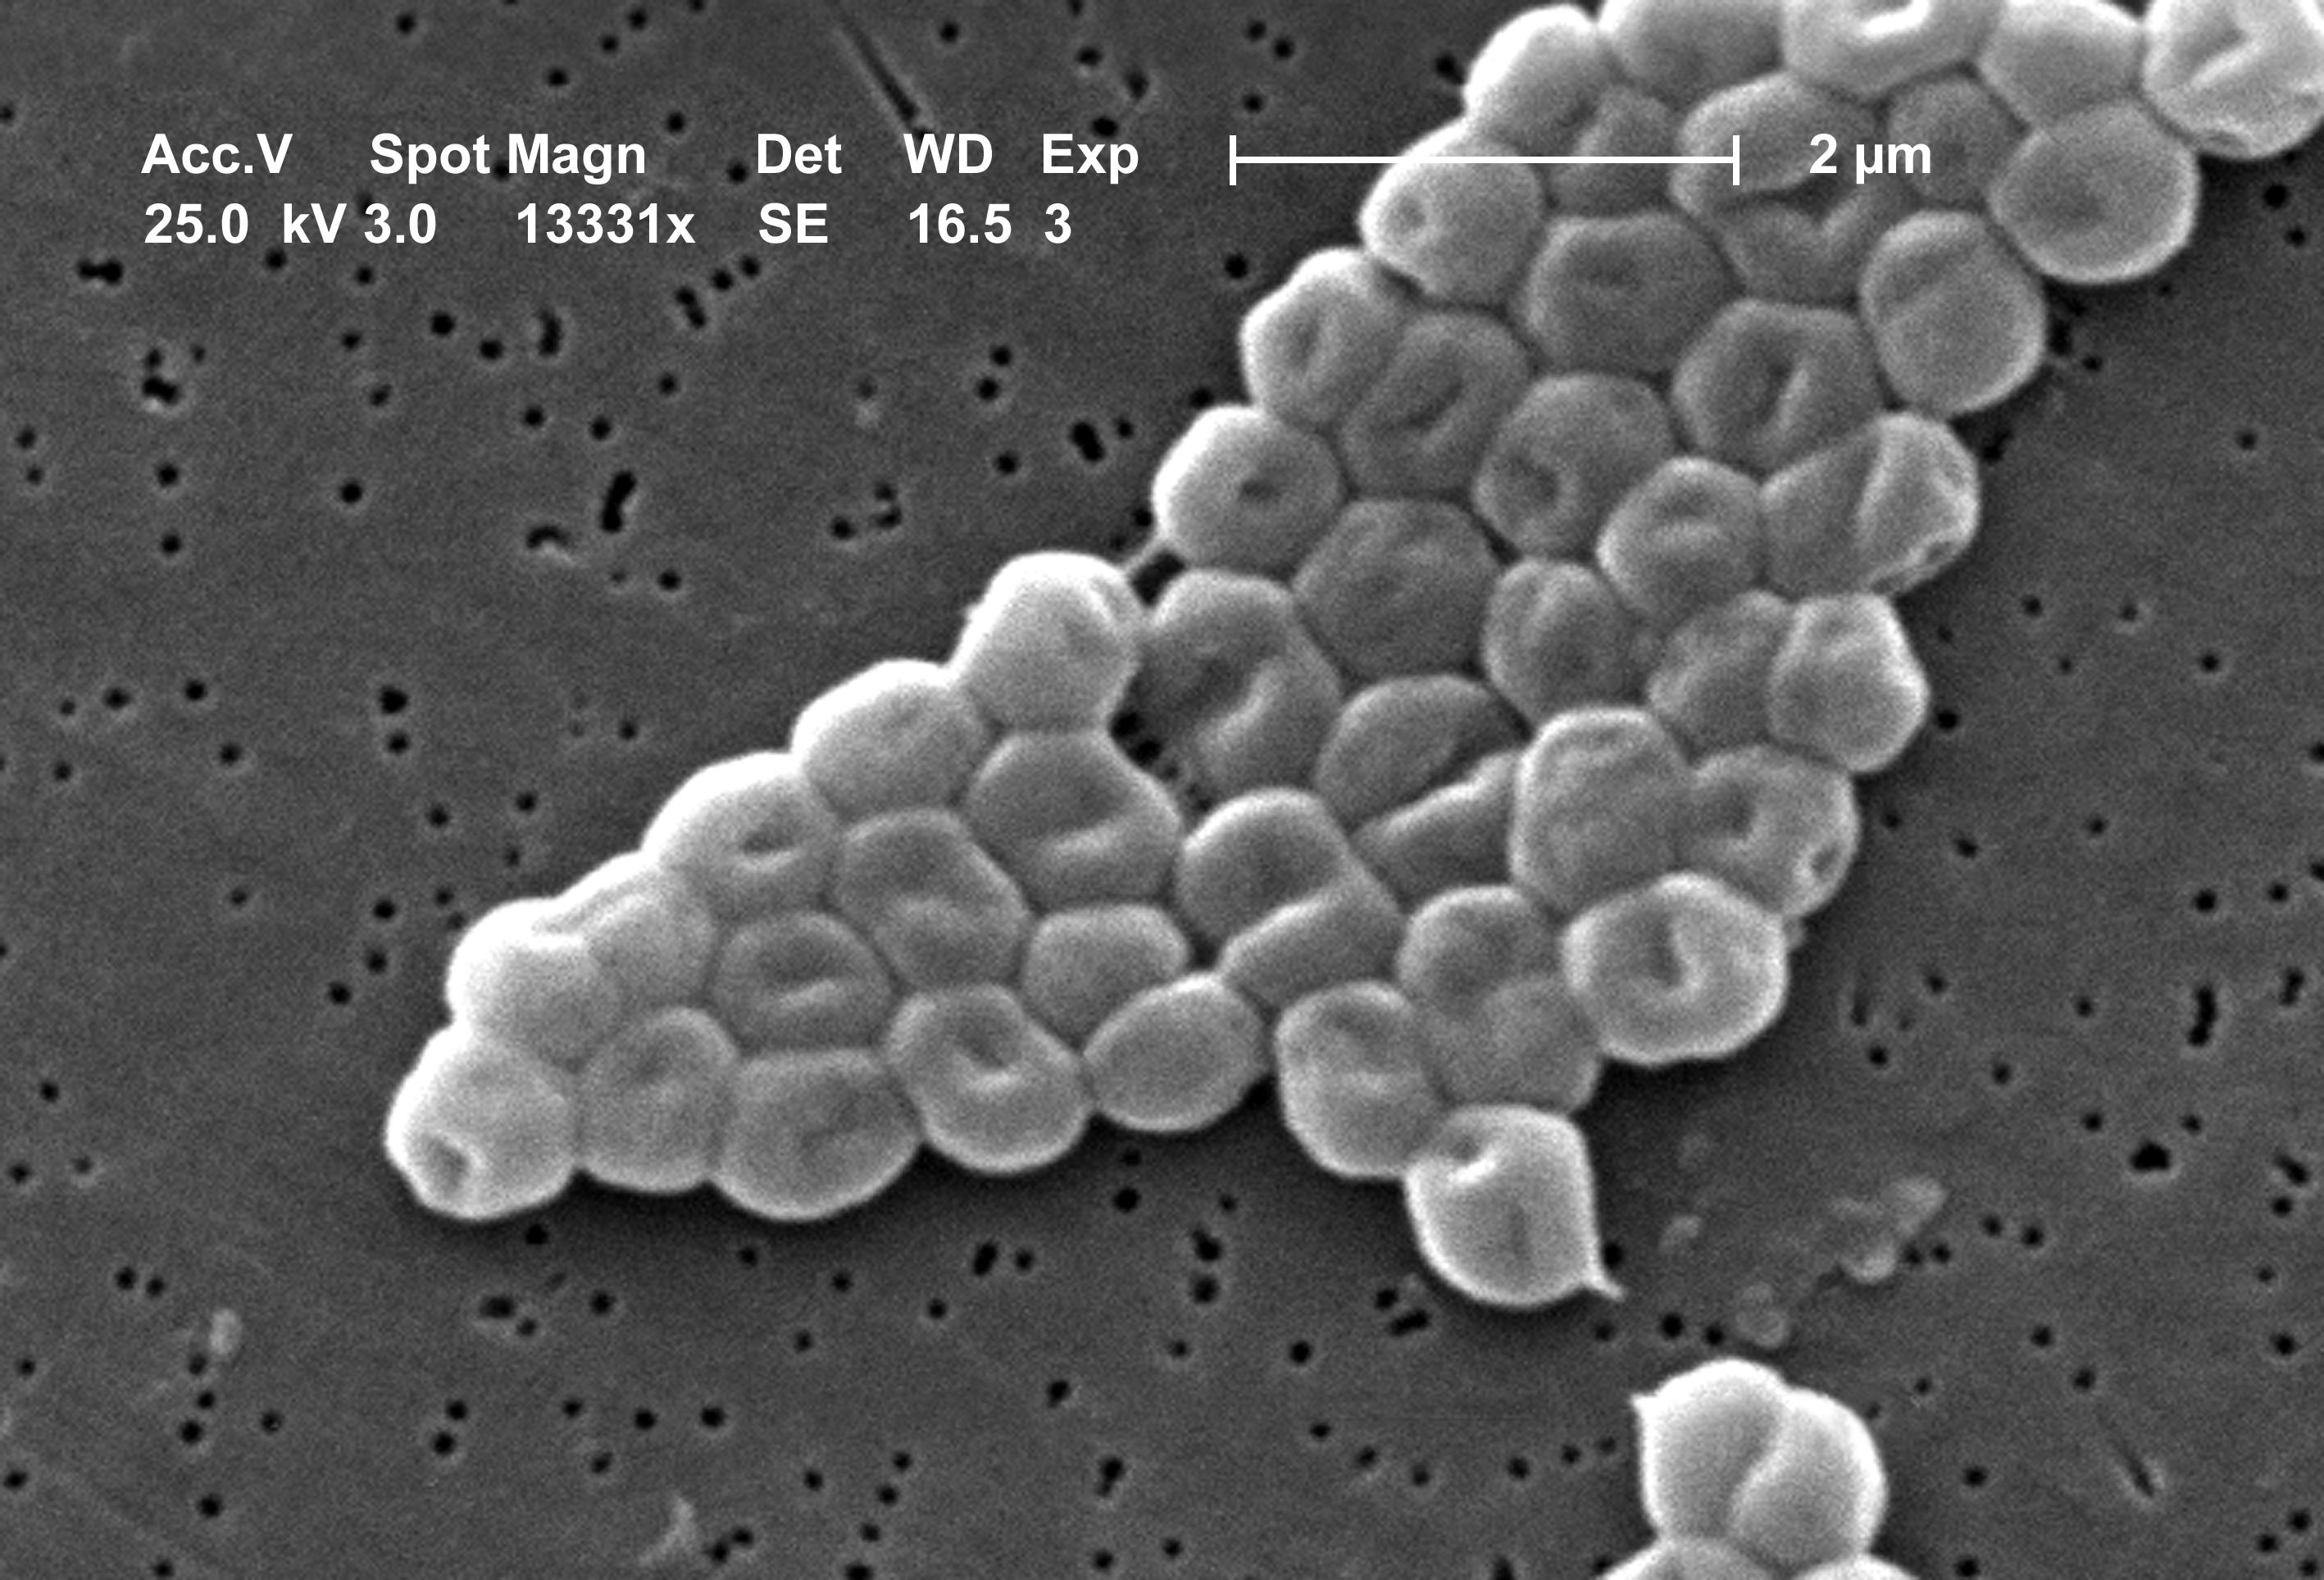 2004 Matthew J. Arduino, DRPH; Janice Carr This SEM depicts a highly magnified cluster of Gram-negative, non-motile Acinetobacter baumannii bacteria; Mag - 13331x. Members of the genus Acinetobacter are nonmotile rods, 1-1.5µm in diameter, and 1.5-2.5µm in length, becoming spherical in shape while in their stationary phase of growth. Acinetobacter spp. are widely distributed in nature, and are normal flora on the skin.  Some members of the genus are important because they are an emerging cause of hospital acquired pulmonary, i.e., pneumoniae, hemopathic, and wound infections.